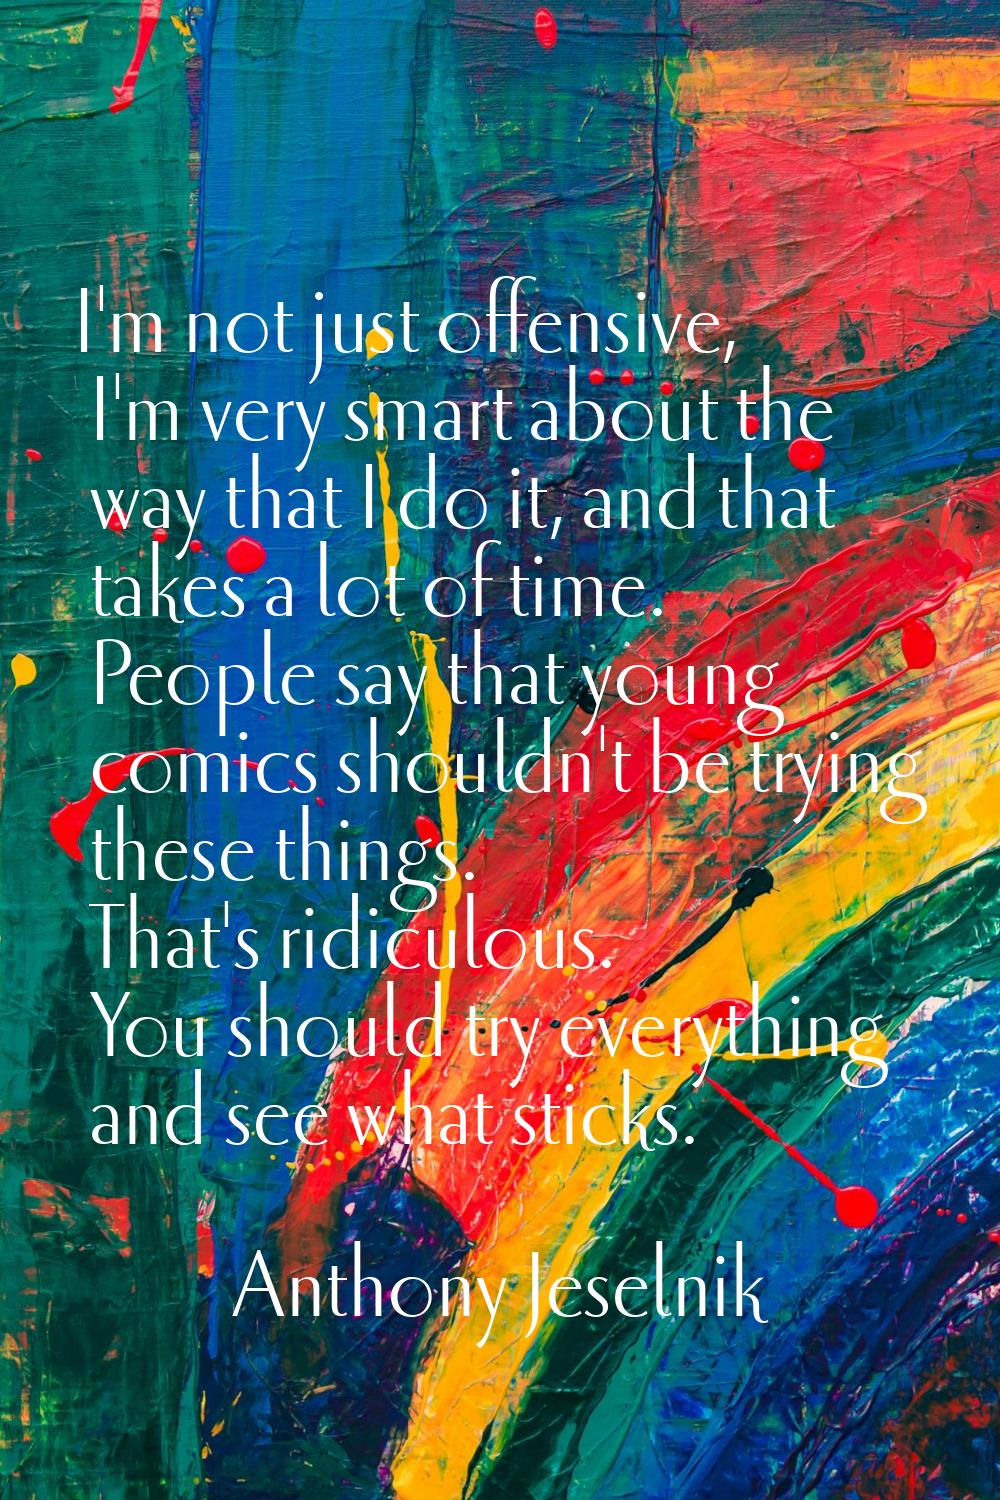 I'm not just offensive, I'm very smart about the way that I do it, and that takes a lot of time. Pe